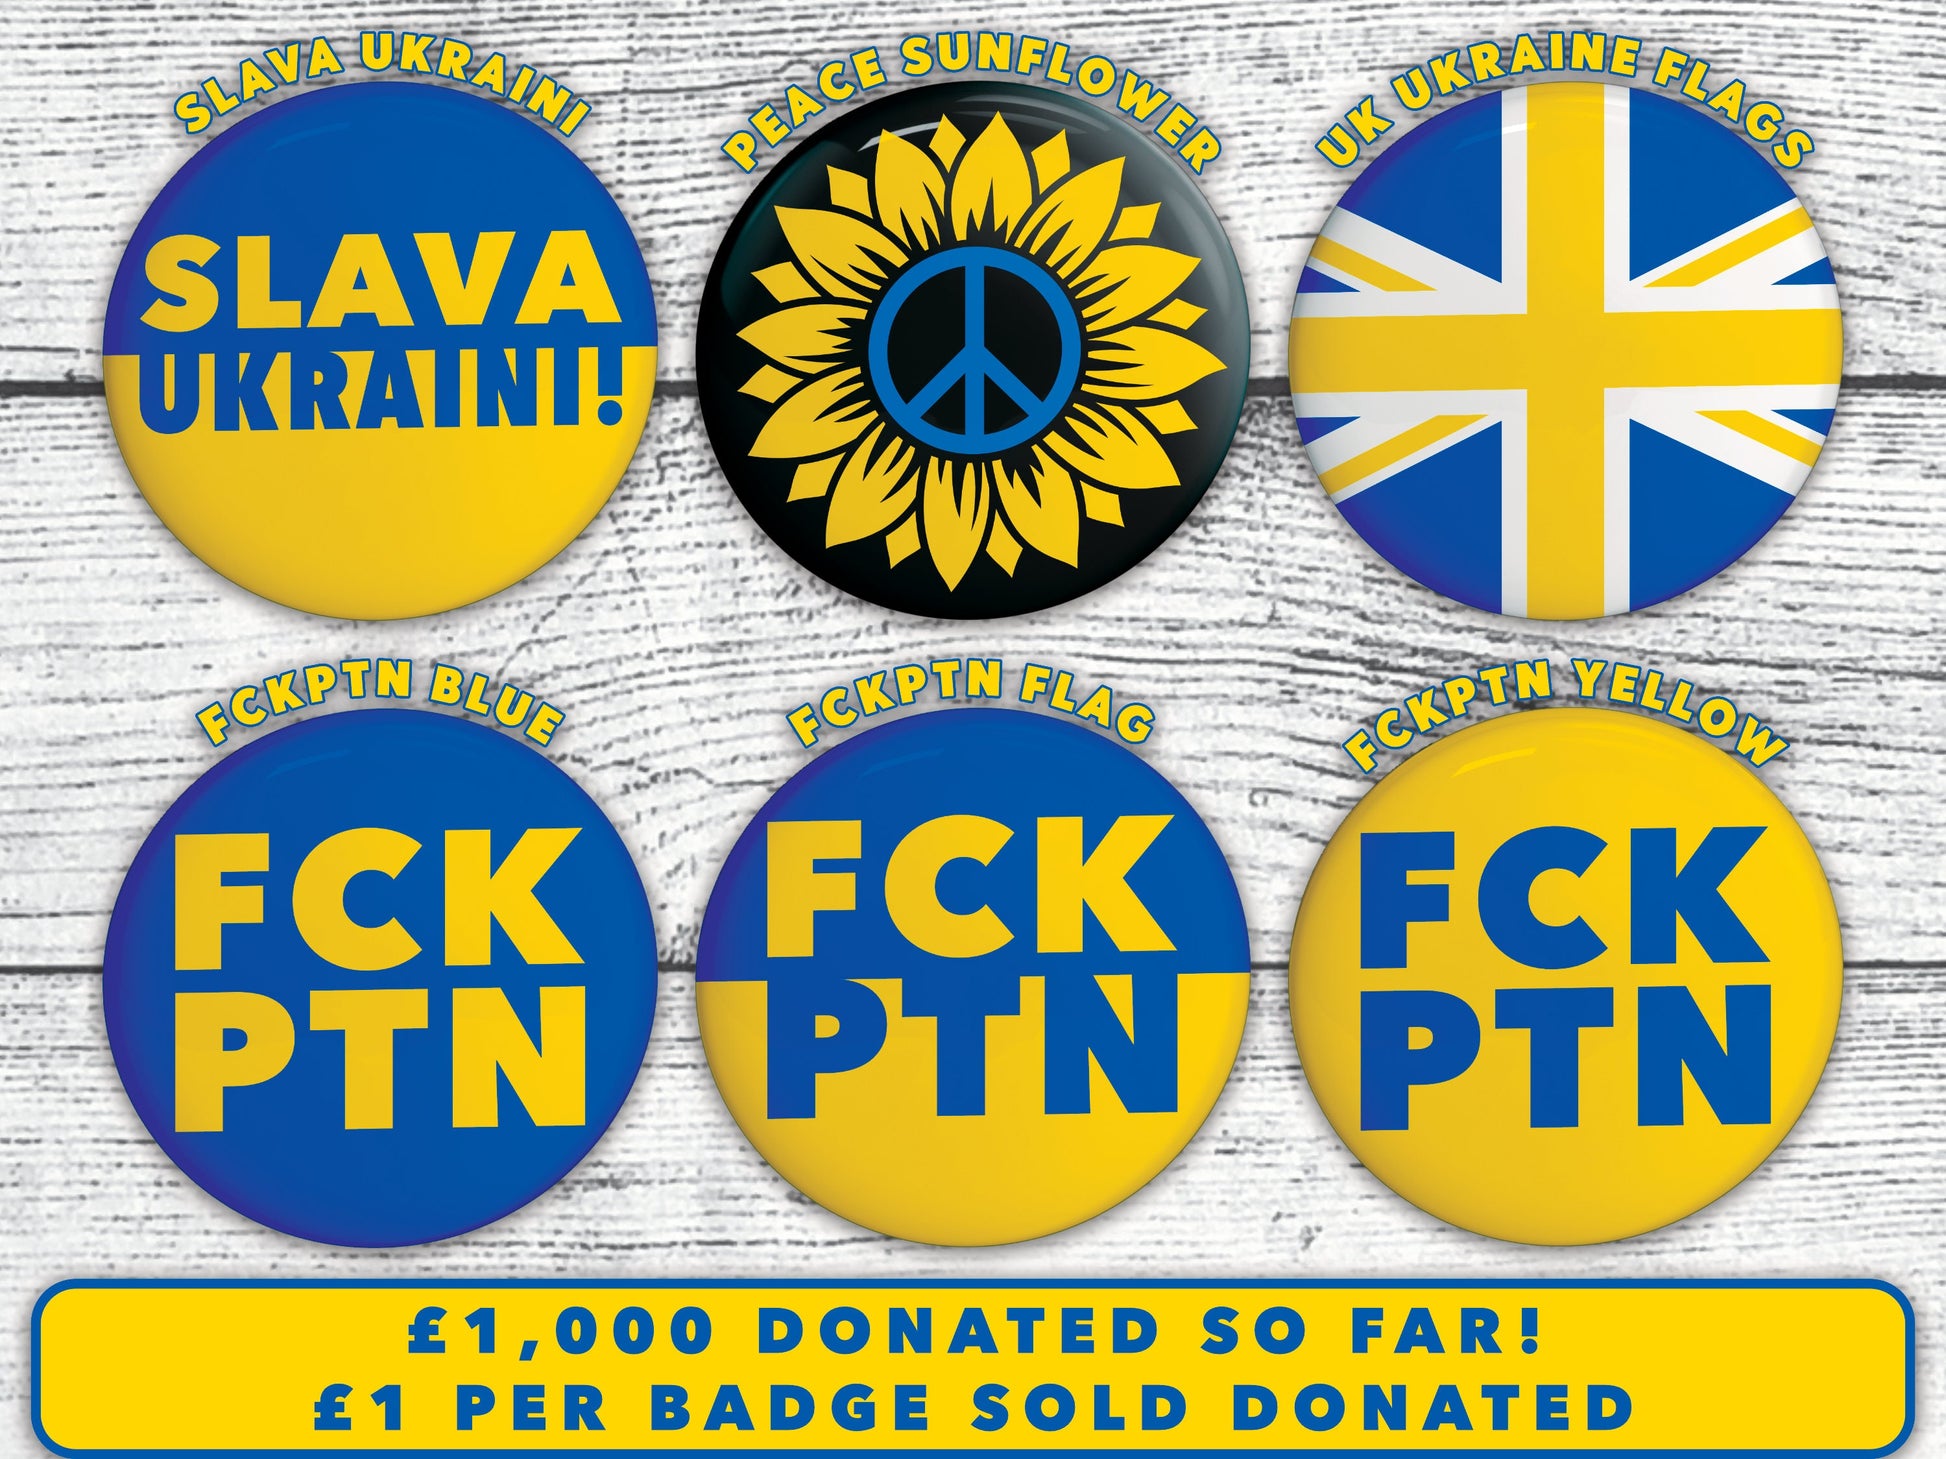 Ukraine Pin Badge New, Ukrainian Flag Colours Pin Back Button, No War In Ukraine, Donations to Disasters Emergency Committee DEC UK Charity